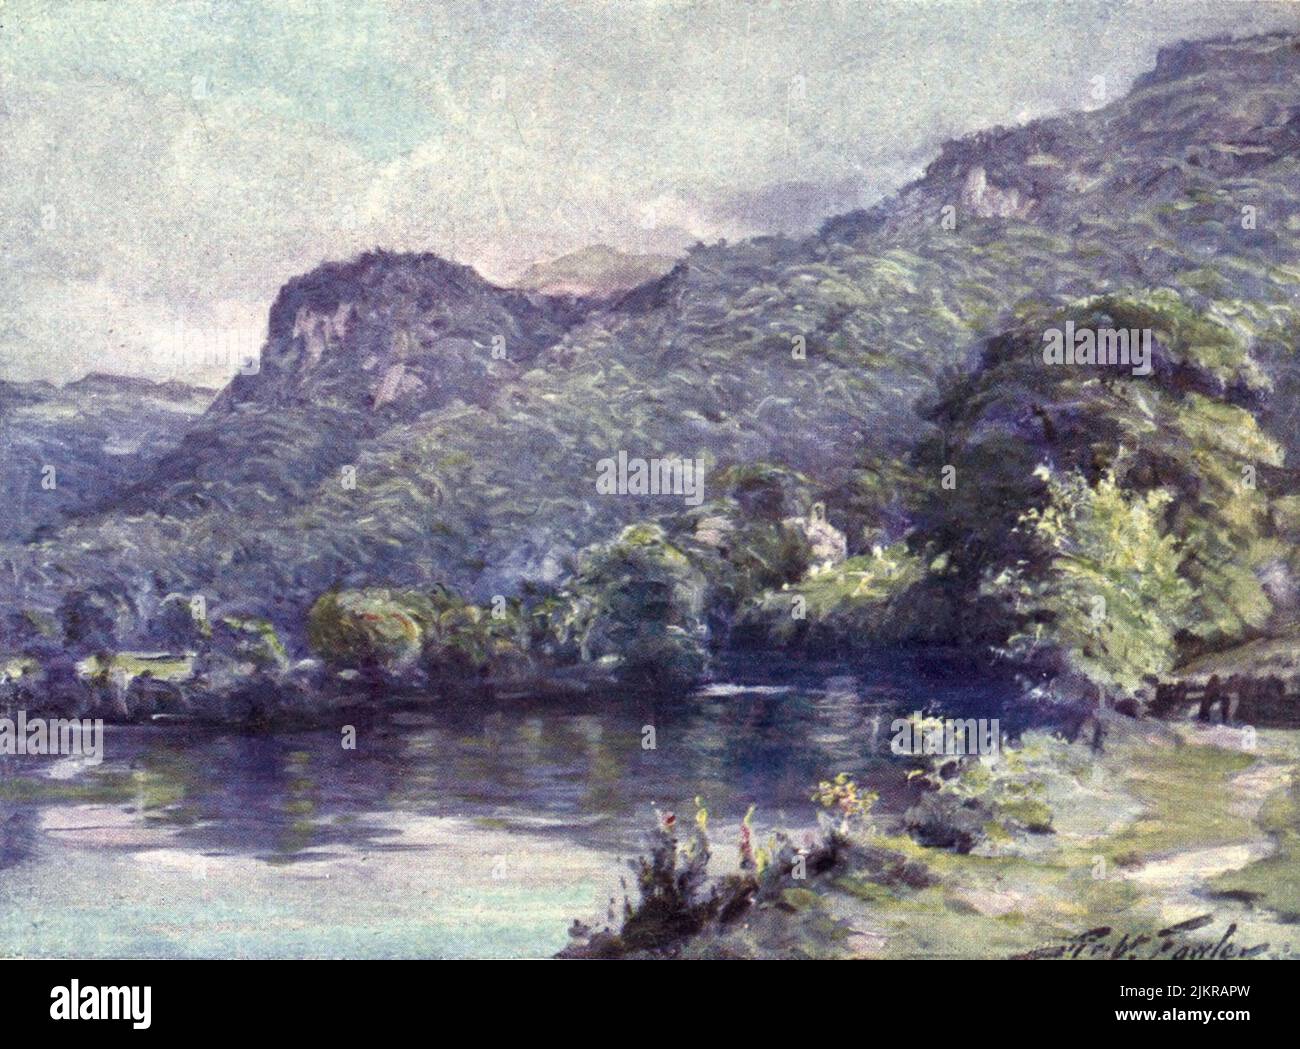 Church Pool, Bettws-y-Coed watercolour painting by Robert Fowler from the book ' BEAUTIFUL WALES ' Described by Edward Thomas Publication date 1905 Publisher London, A. & C. Black Stock Photo